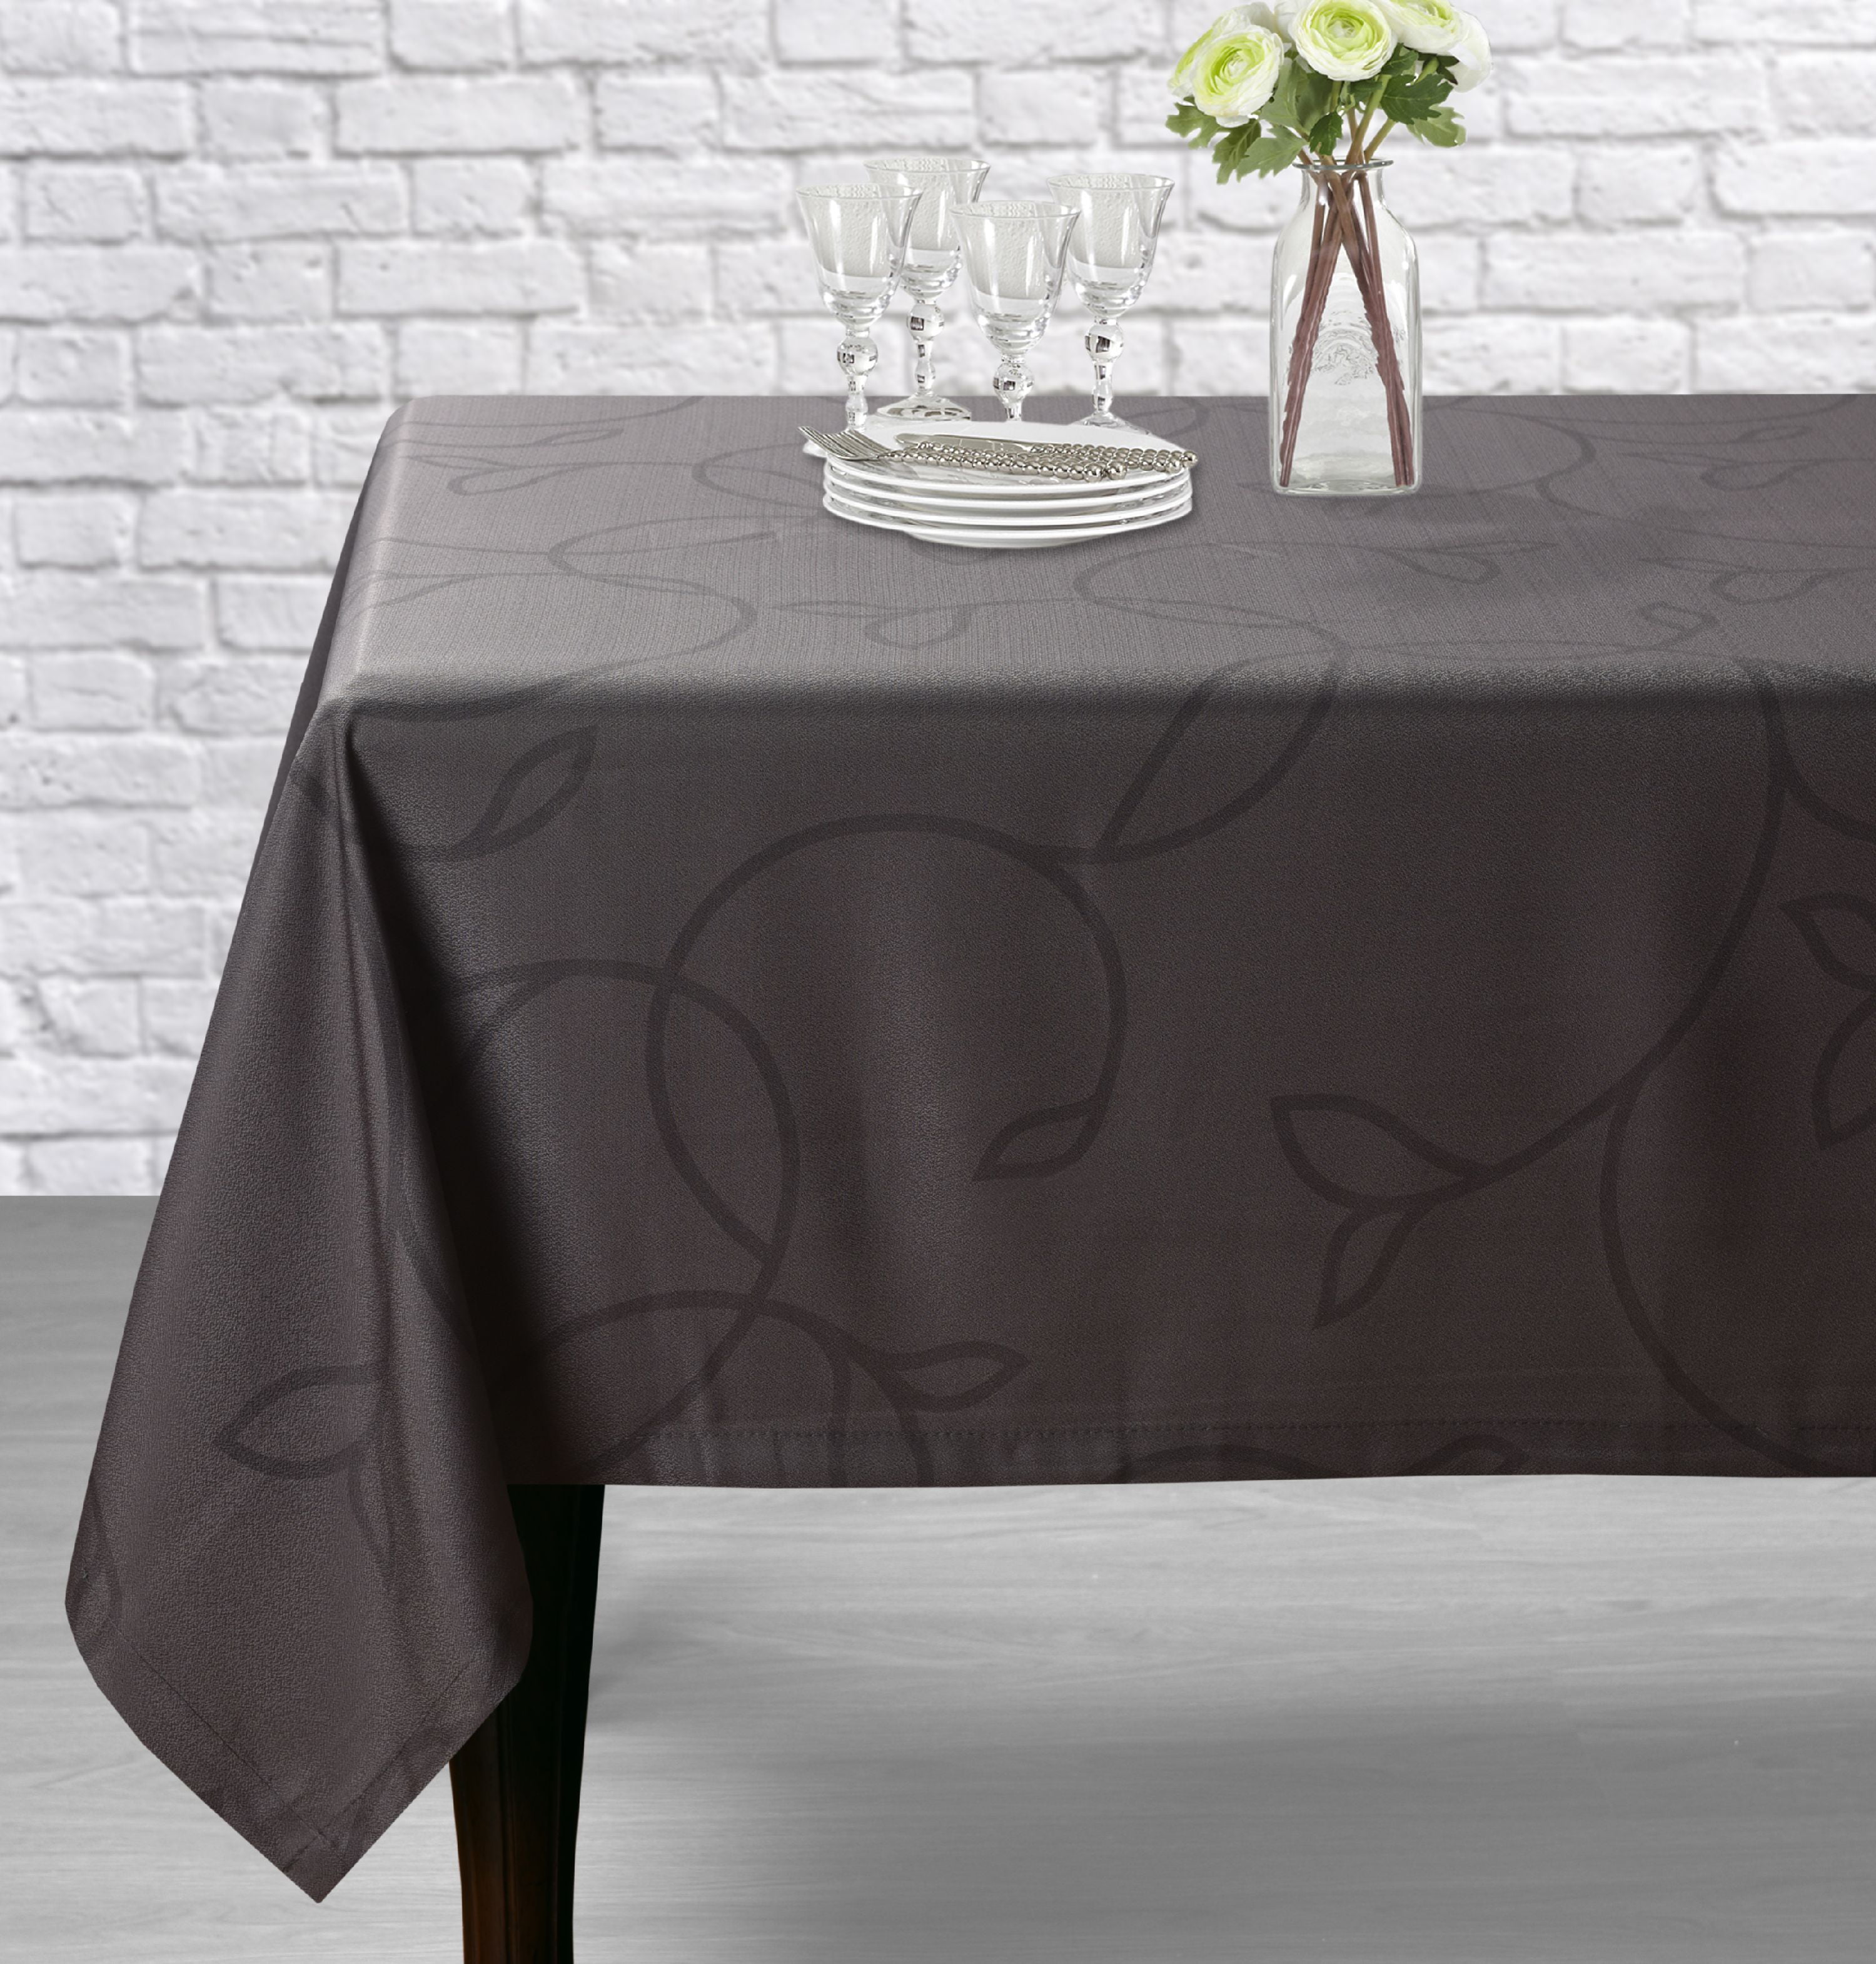 Aiking Home 100-Percent Polyester Jacquard Printed Table Cloth 52